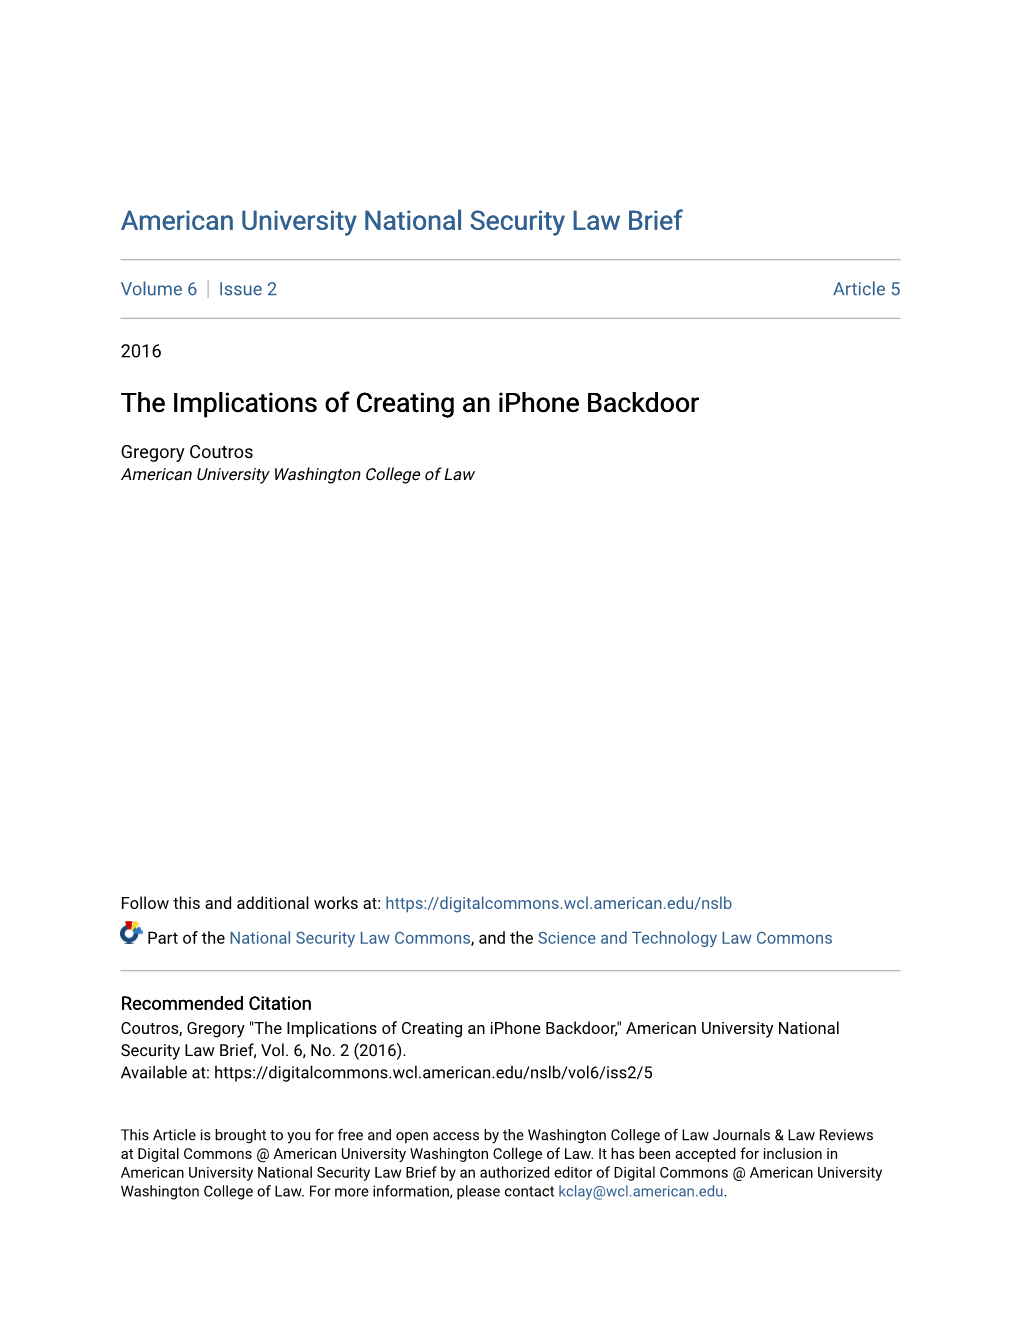 The Implications of Creating an Iphone Backdoor